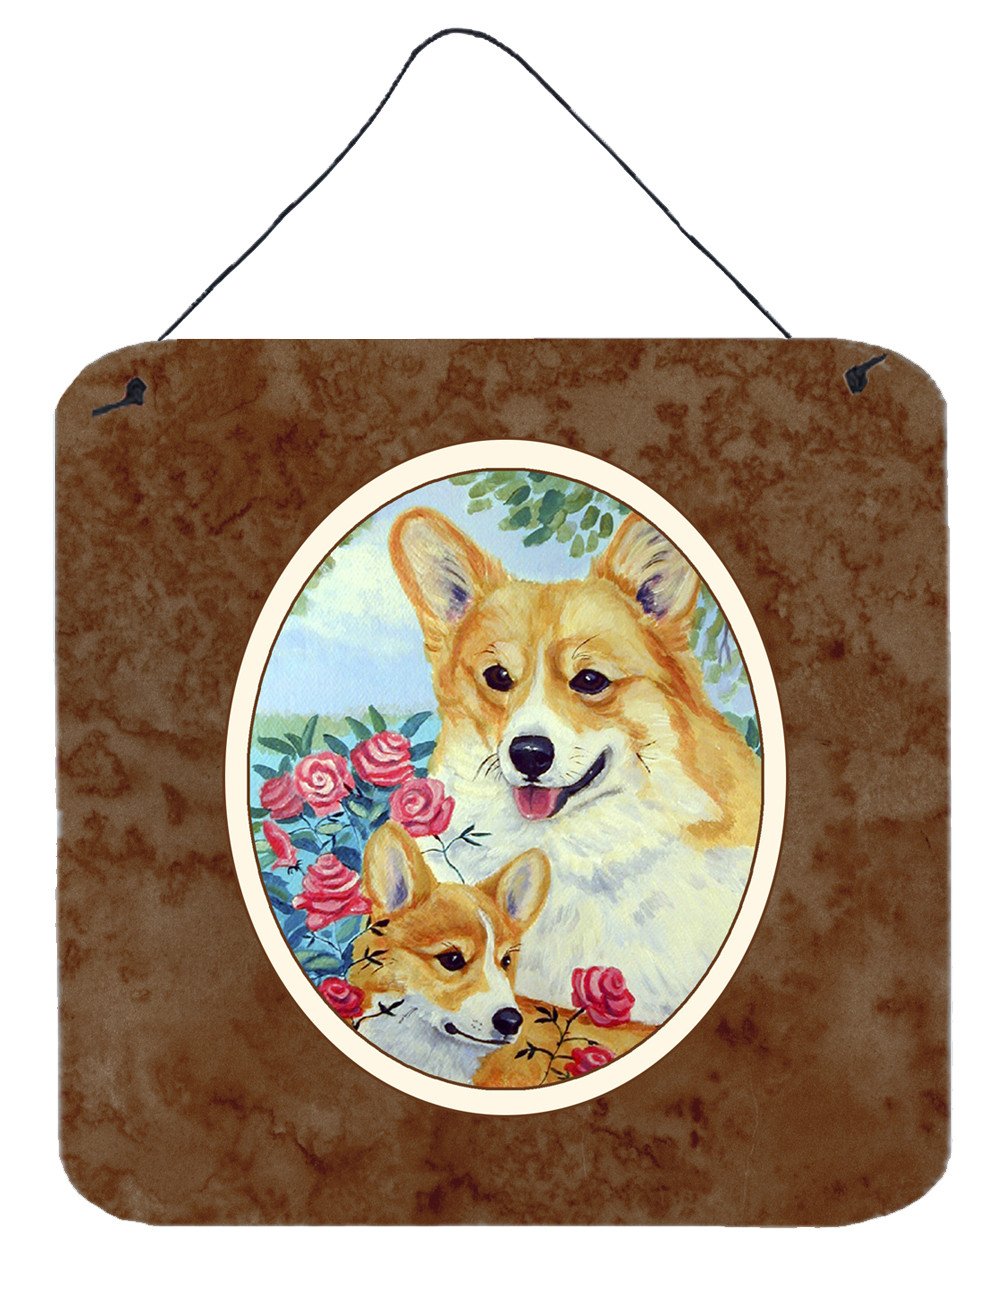 Corgi Momma loves Roses Wall or Door Hanging Prints 7084DS66 by Caroline's Treasures